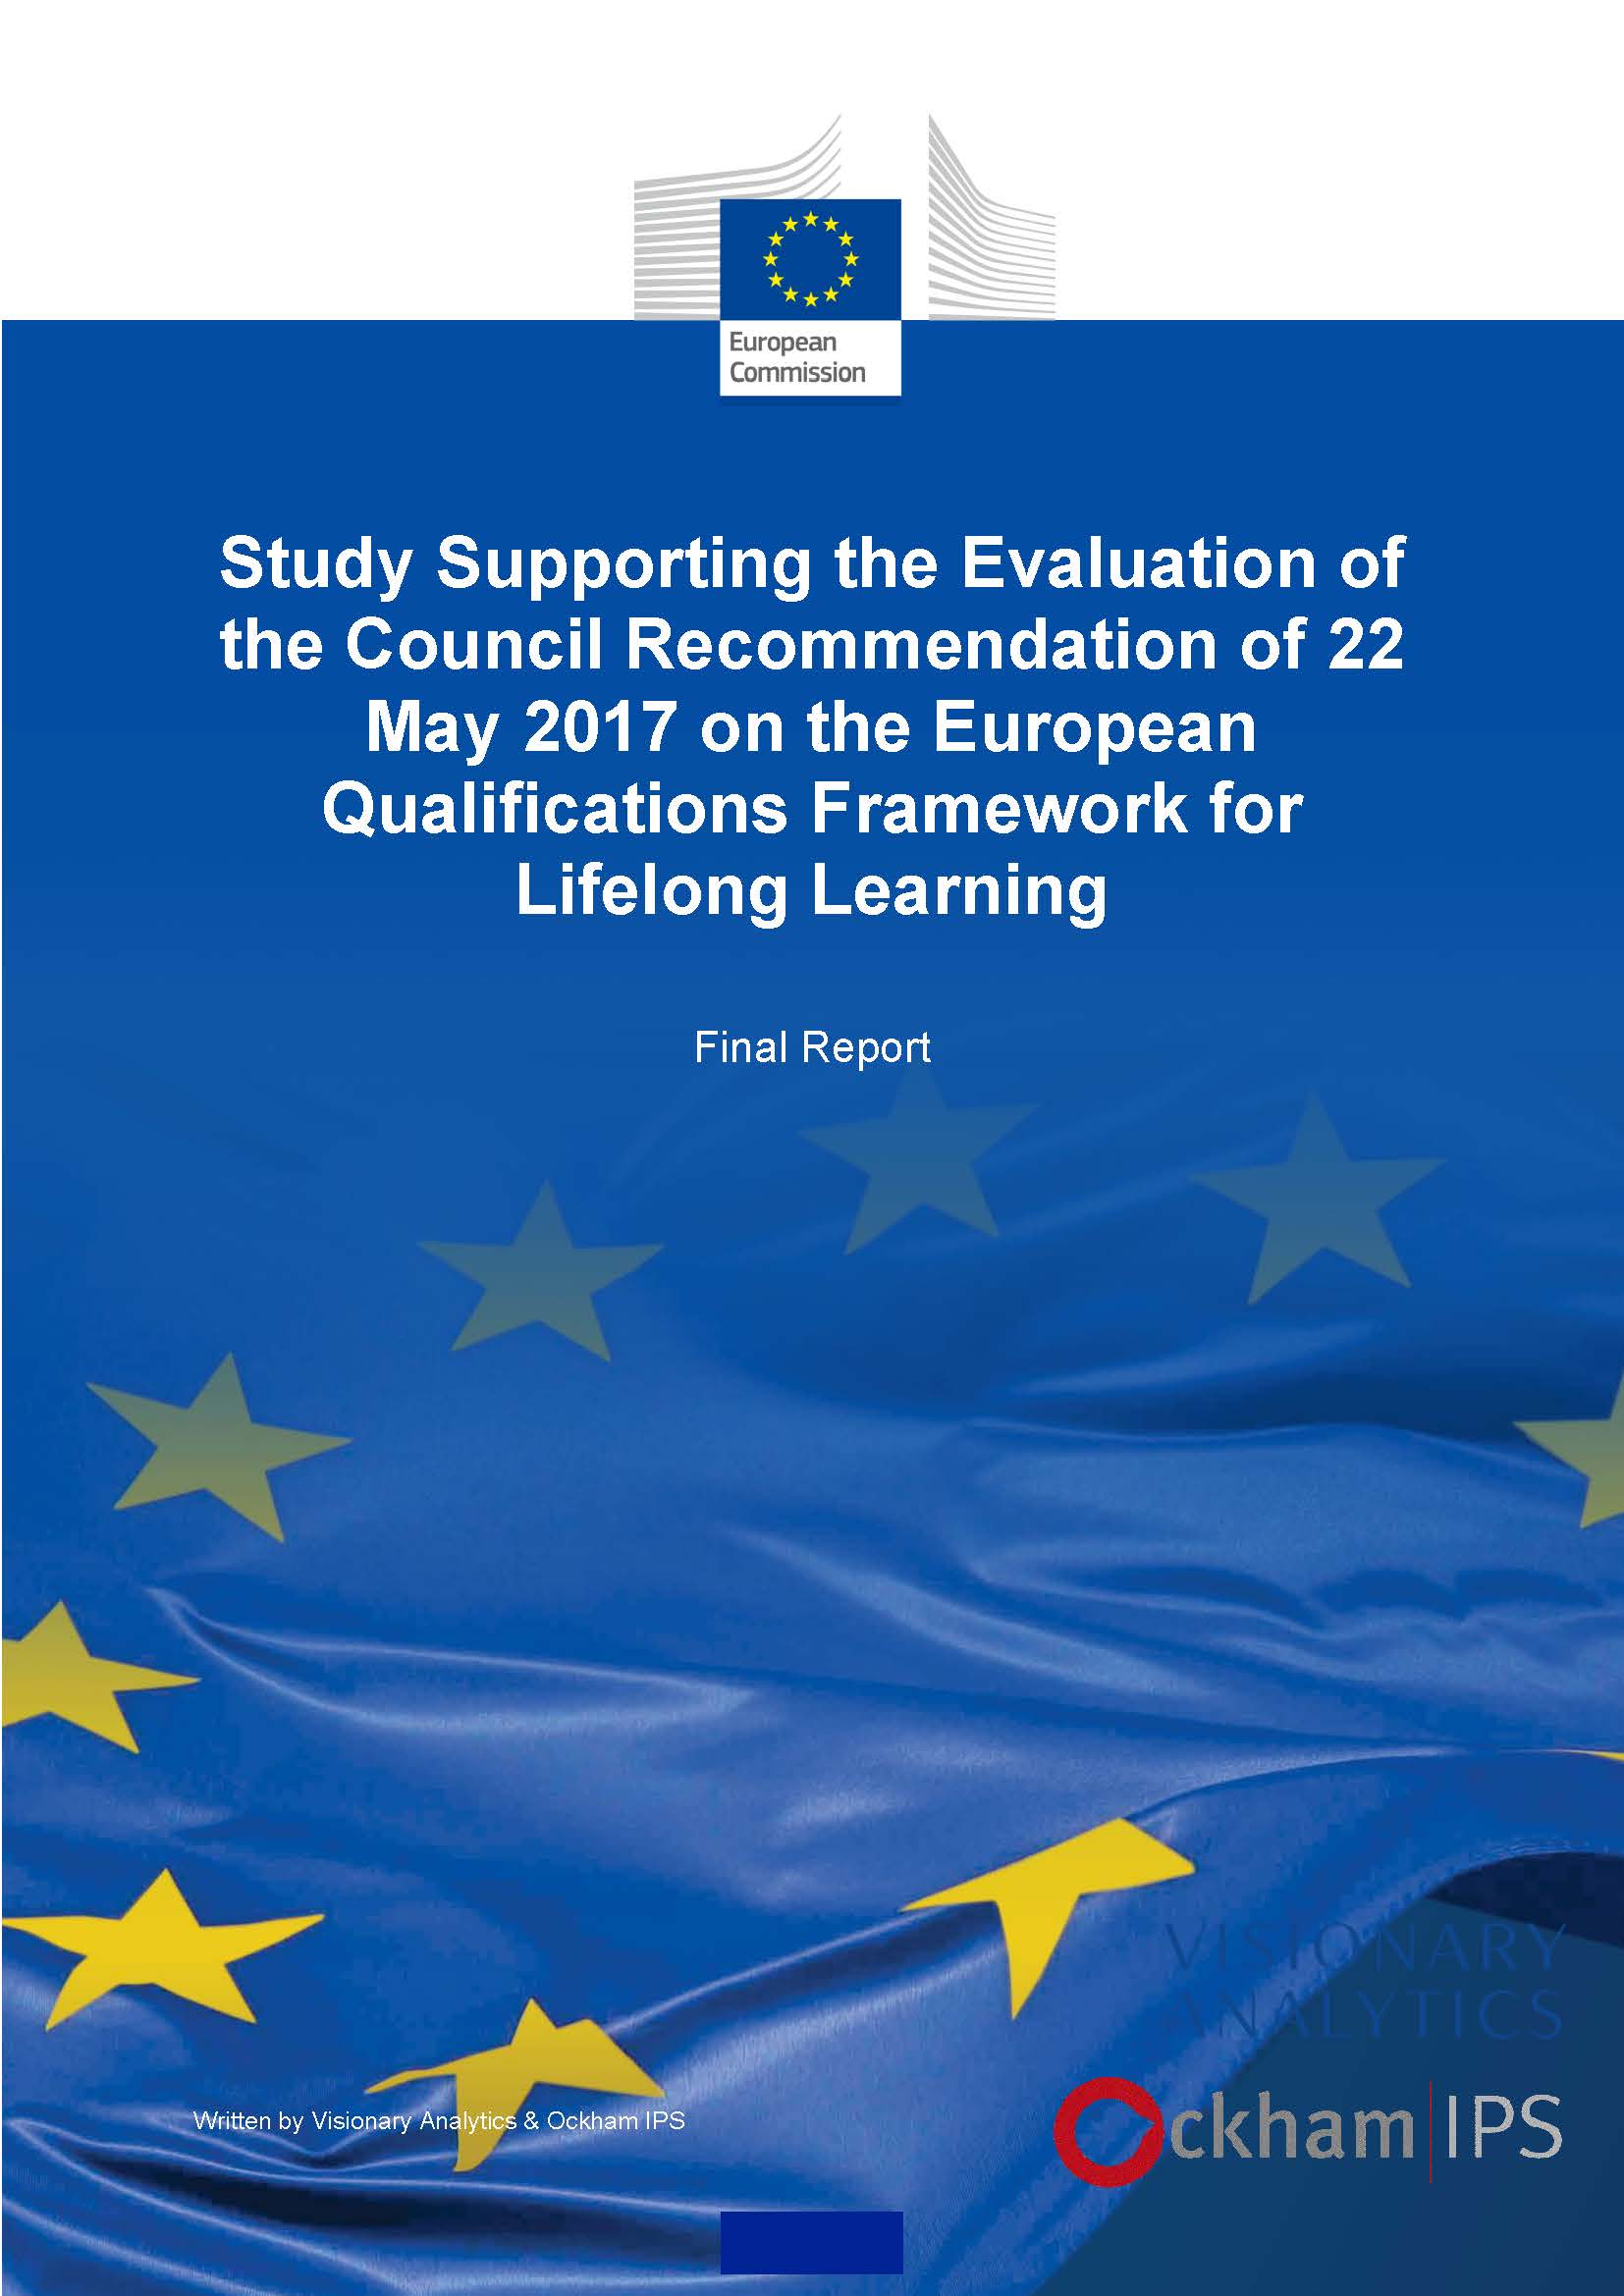 Study Supporting the Evaluation of the Council Recommendation of 22 May 2017 on the European Qualifications Framework for Lifelong Learning